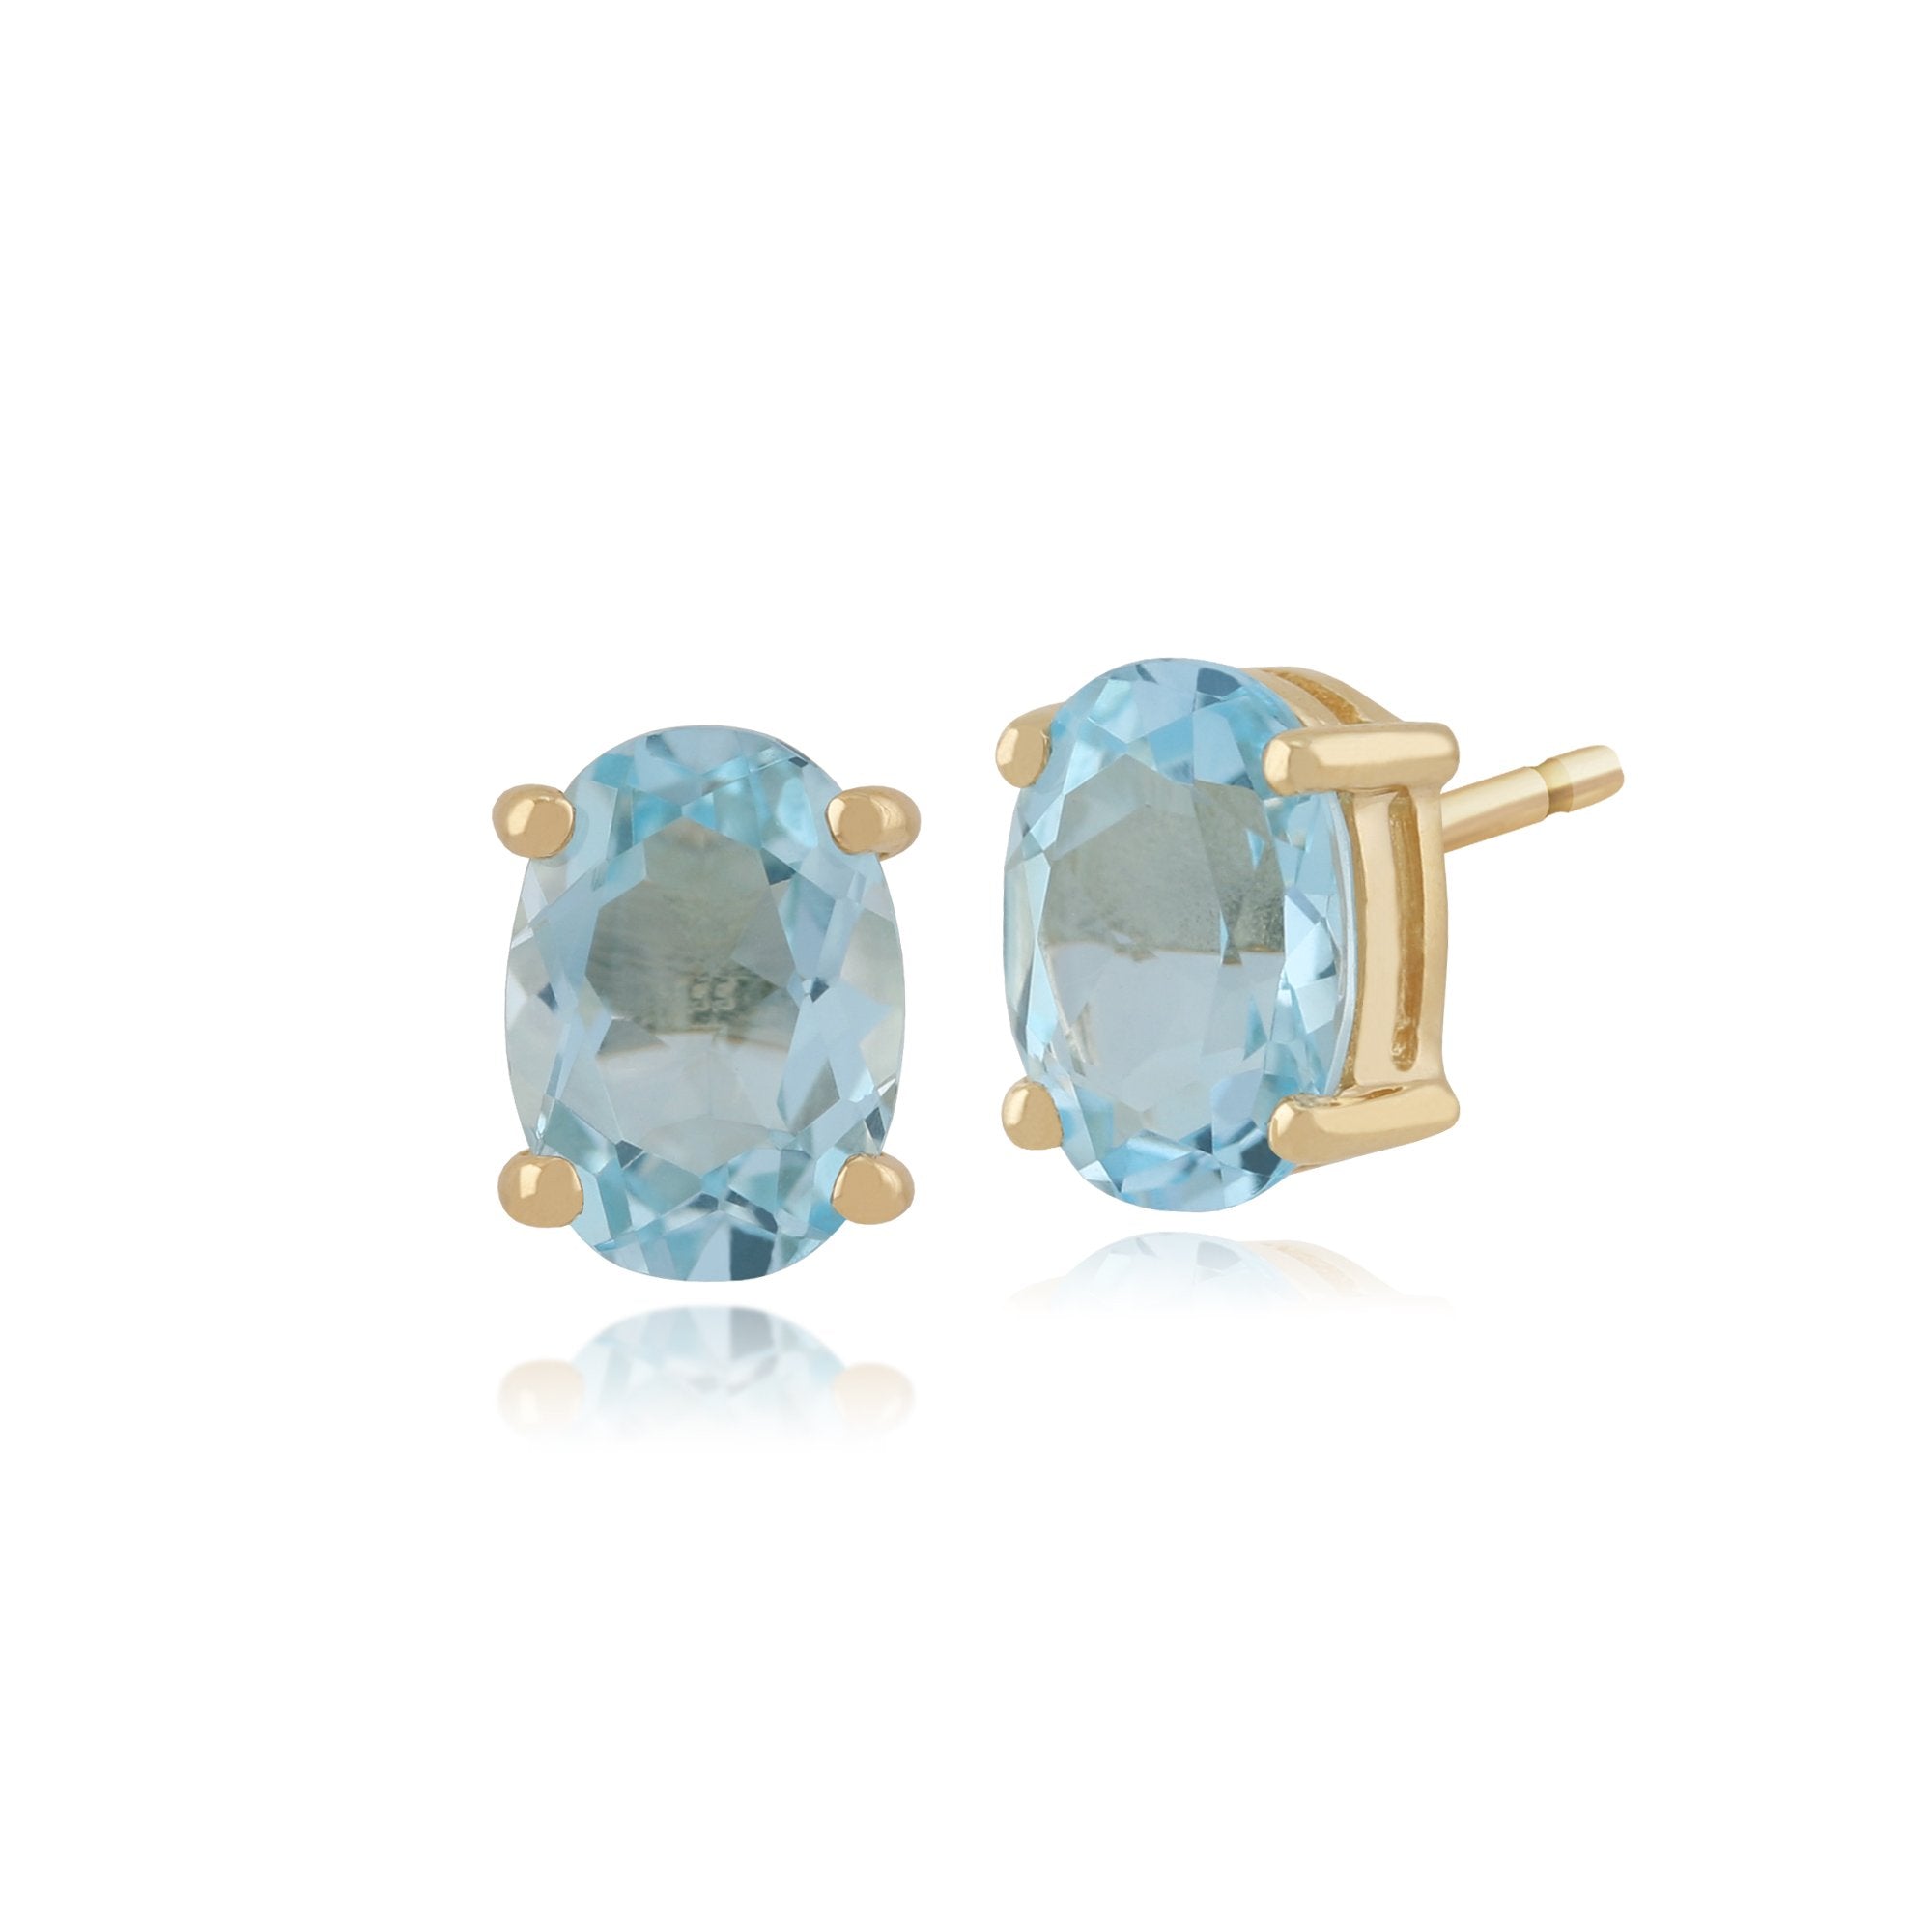 Classic Oval Blue Topaz Stud Earrings in 9ct Yellow Gold 7x5mm